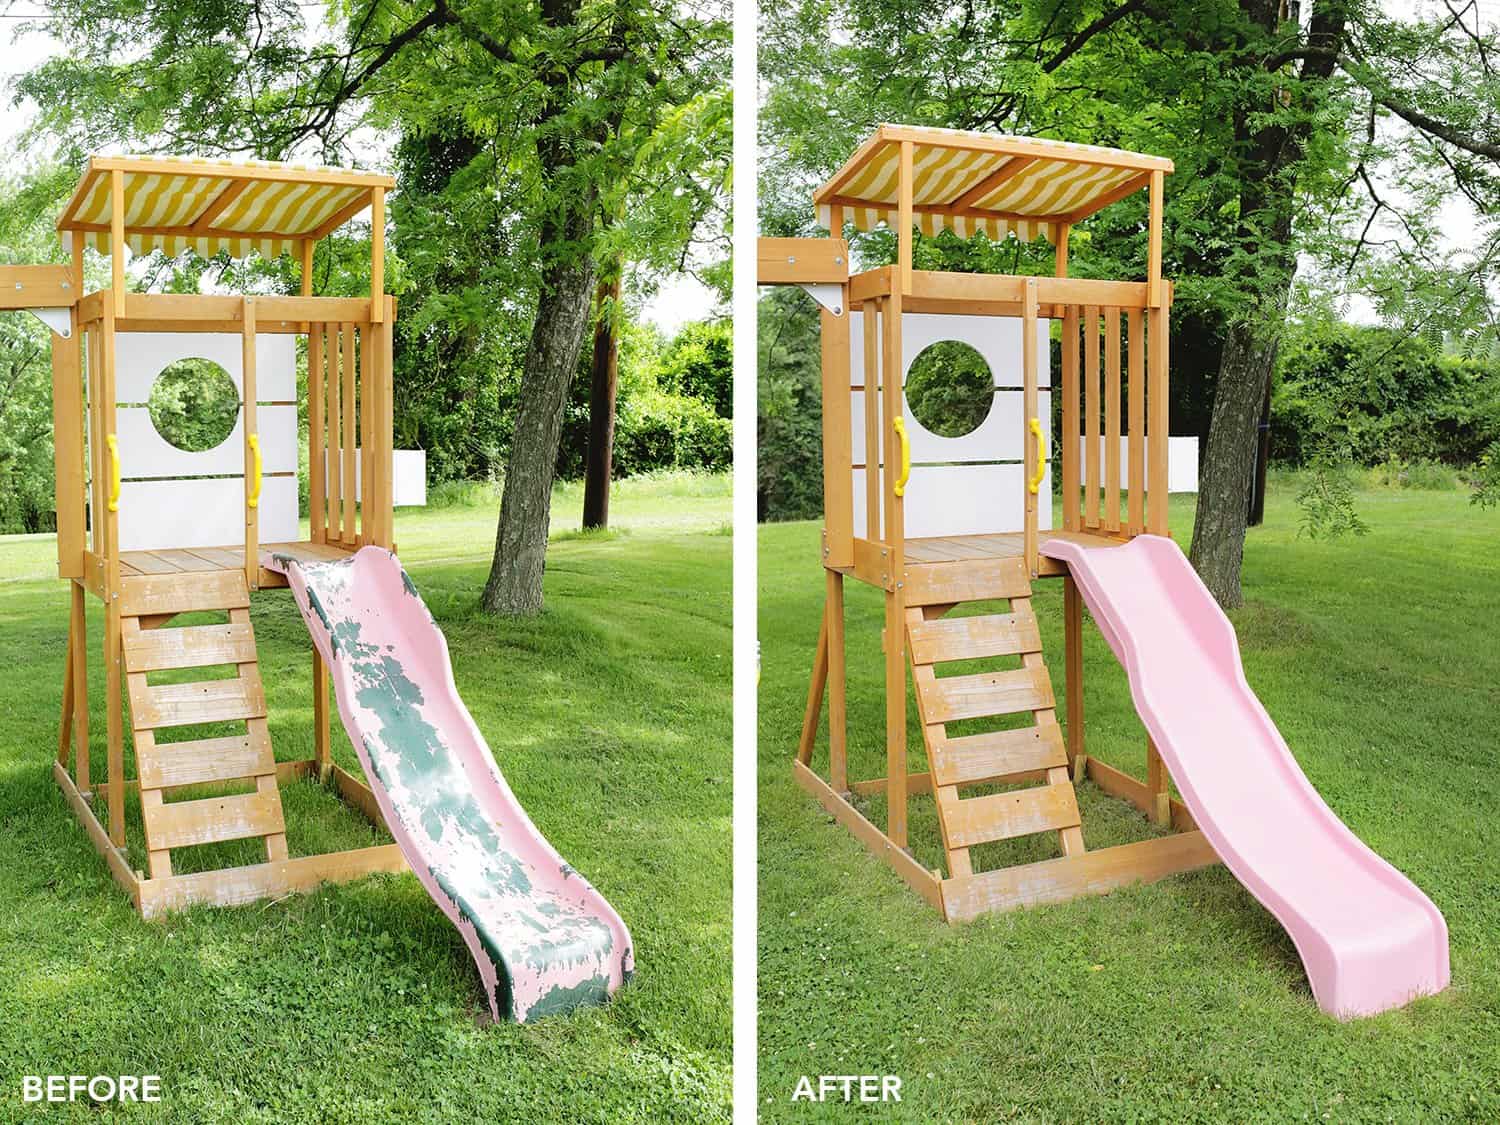 comparison of before and after the slide is painted